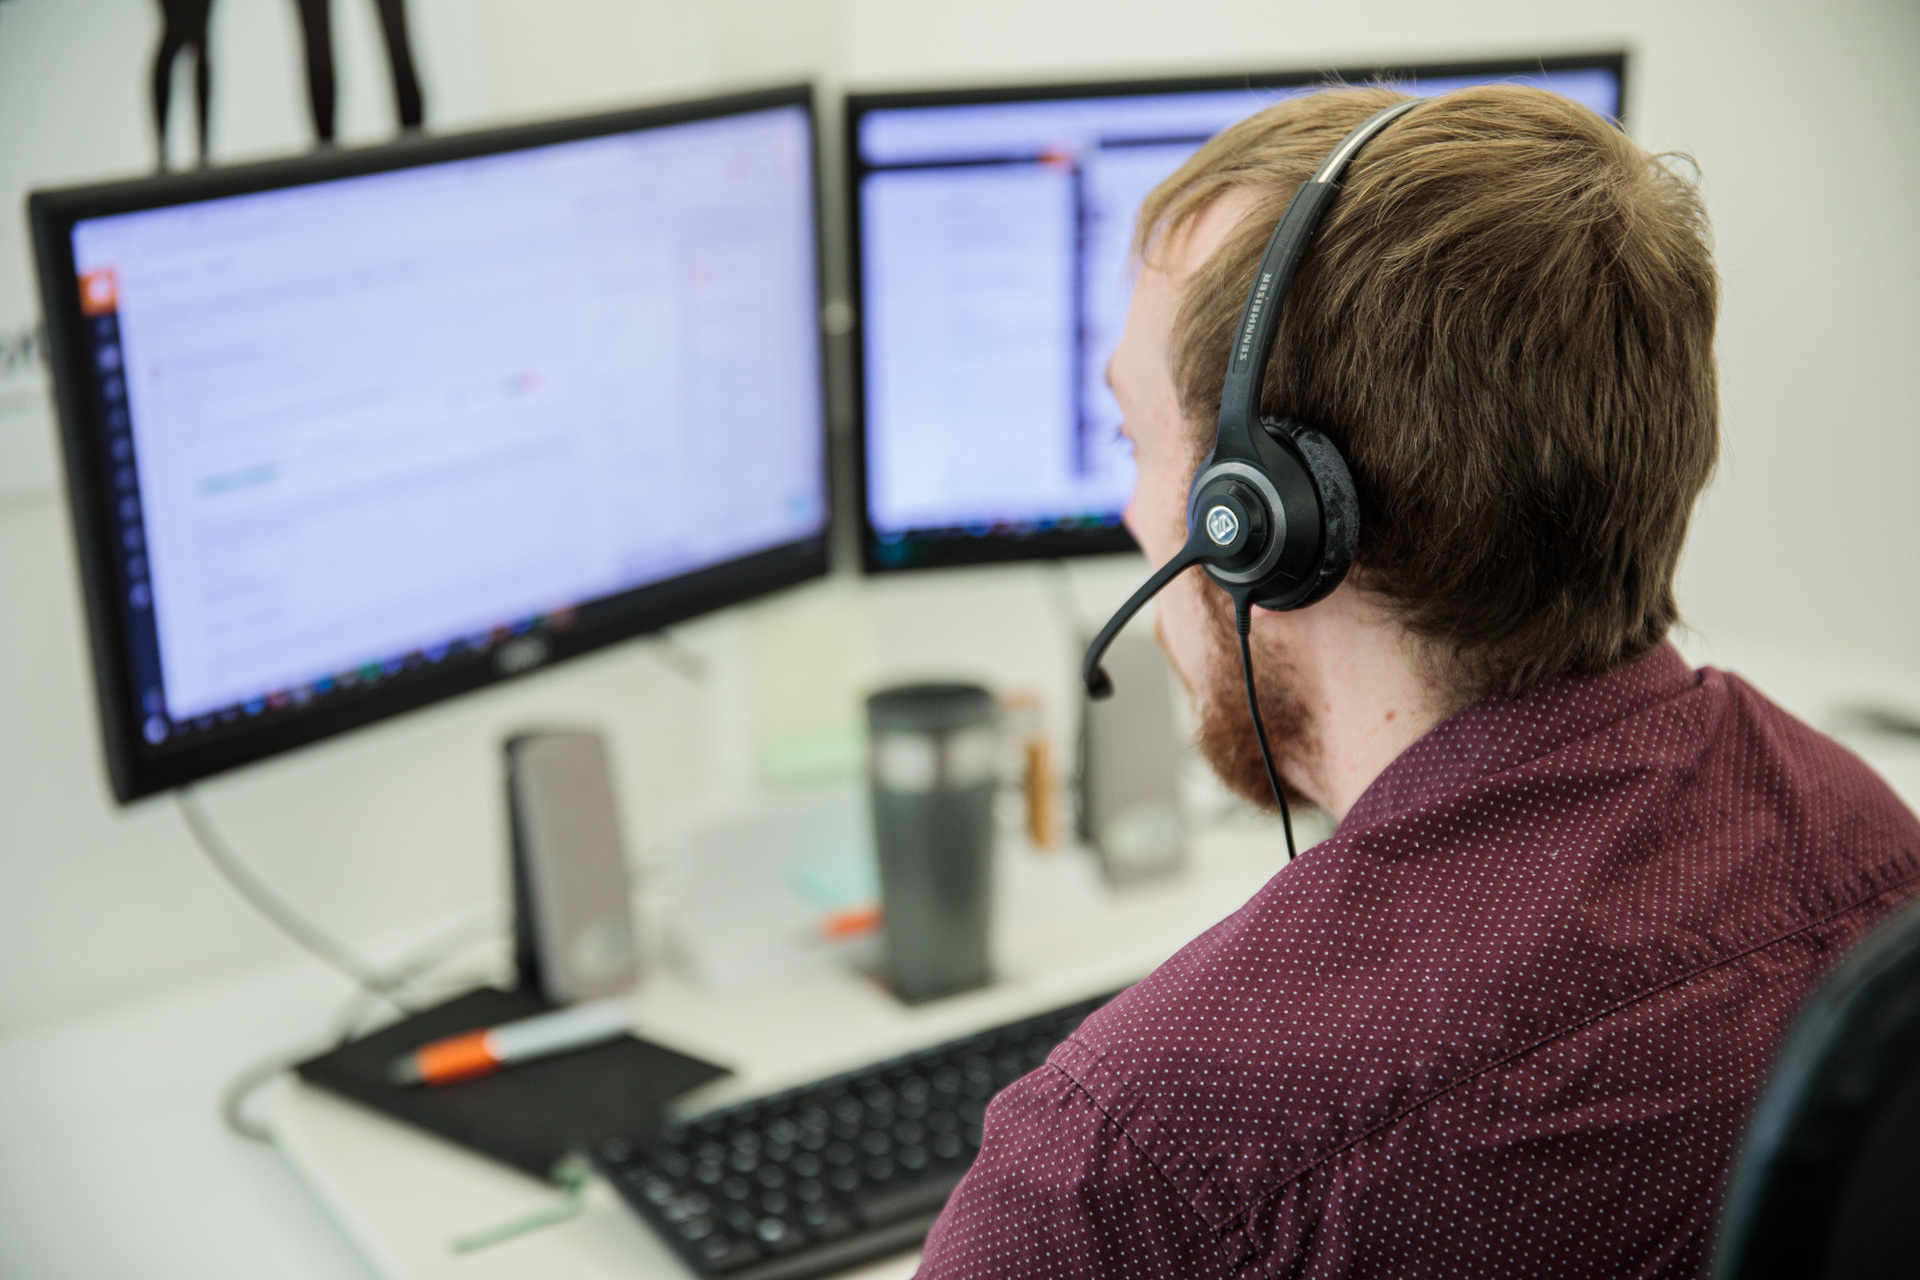 A man wearing a headset working on his computer